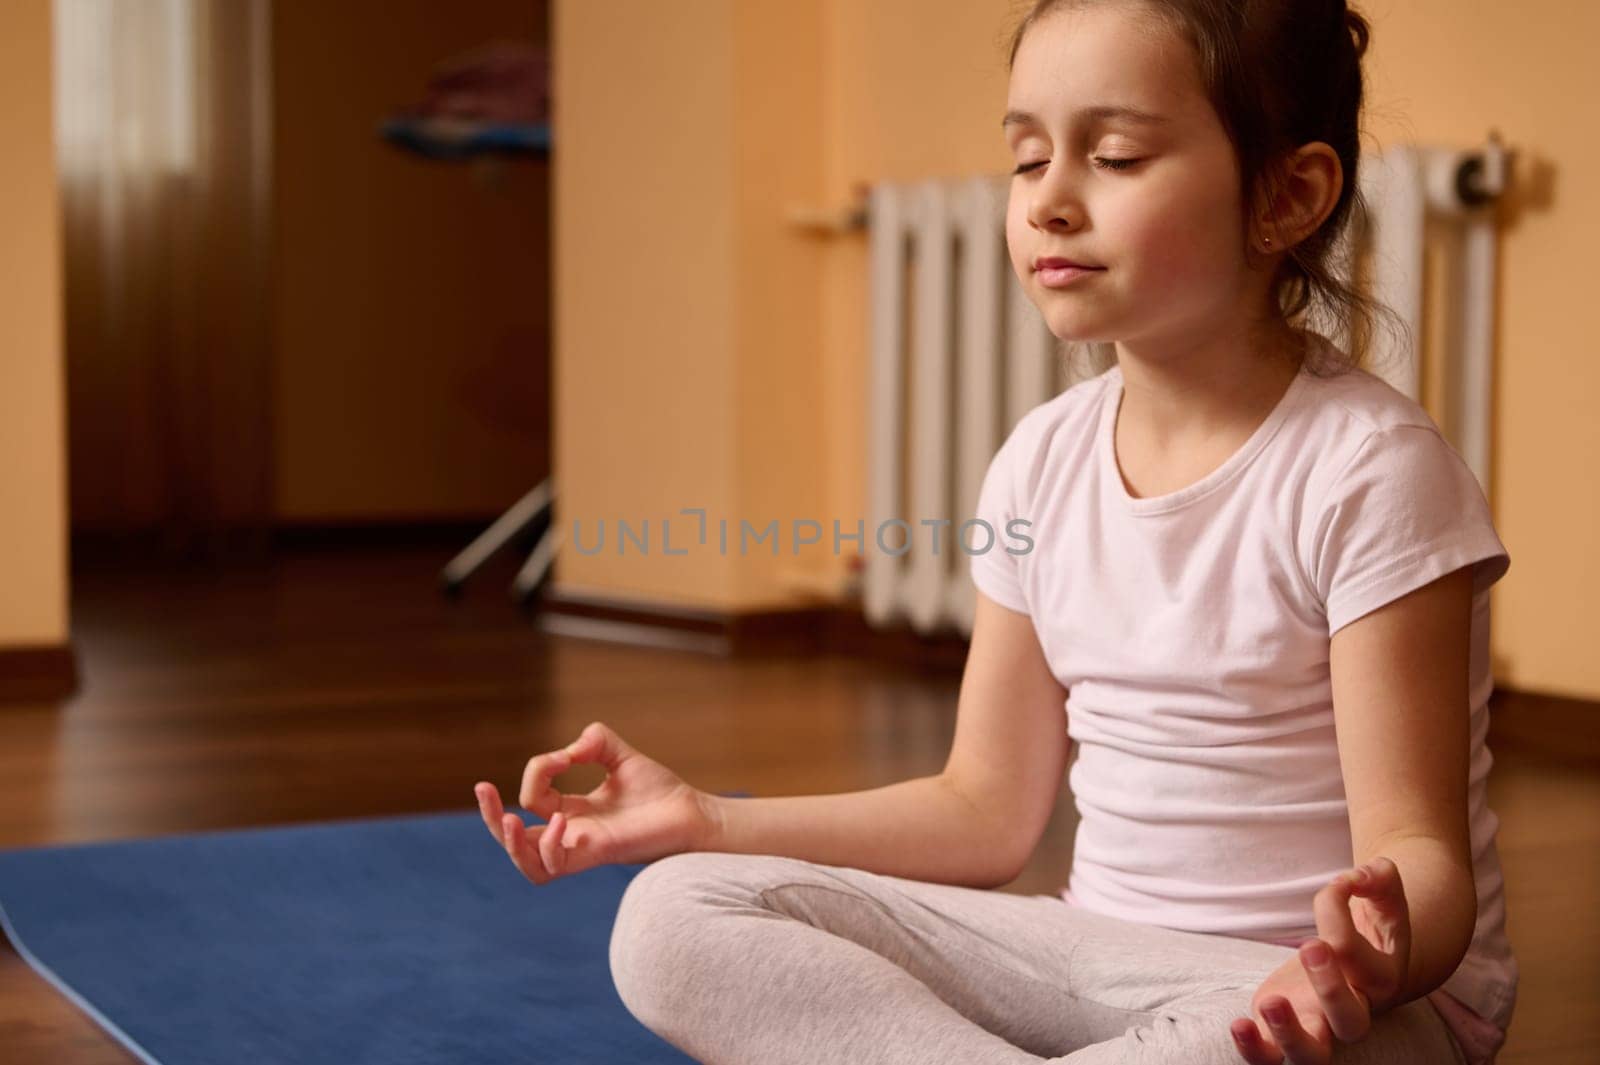 Portrait of a Caucasian peaceful cute little kid girl holding fingers in mudra gesture, meditating with her eyes closed. Little yogi feeling calm, positive and relaxed. Yoga practice and meditation